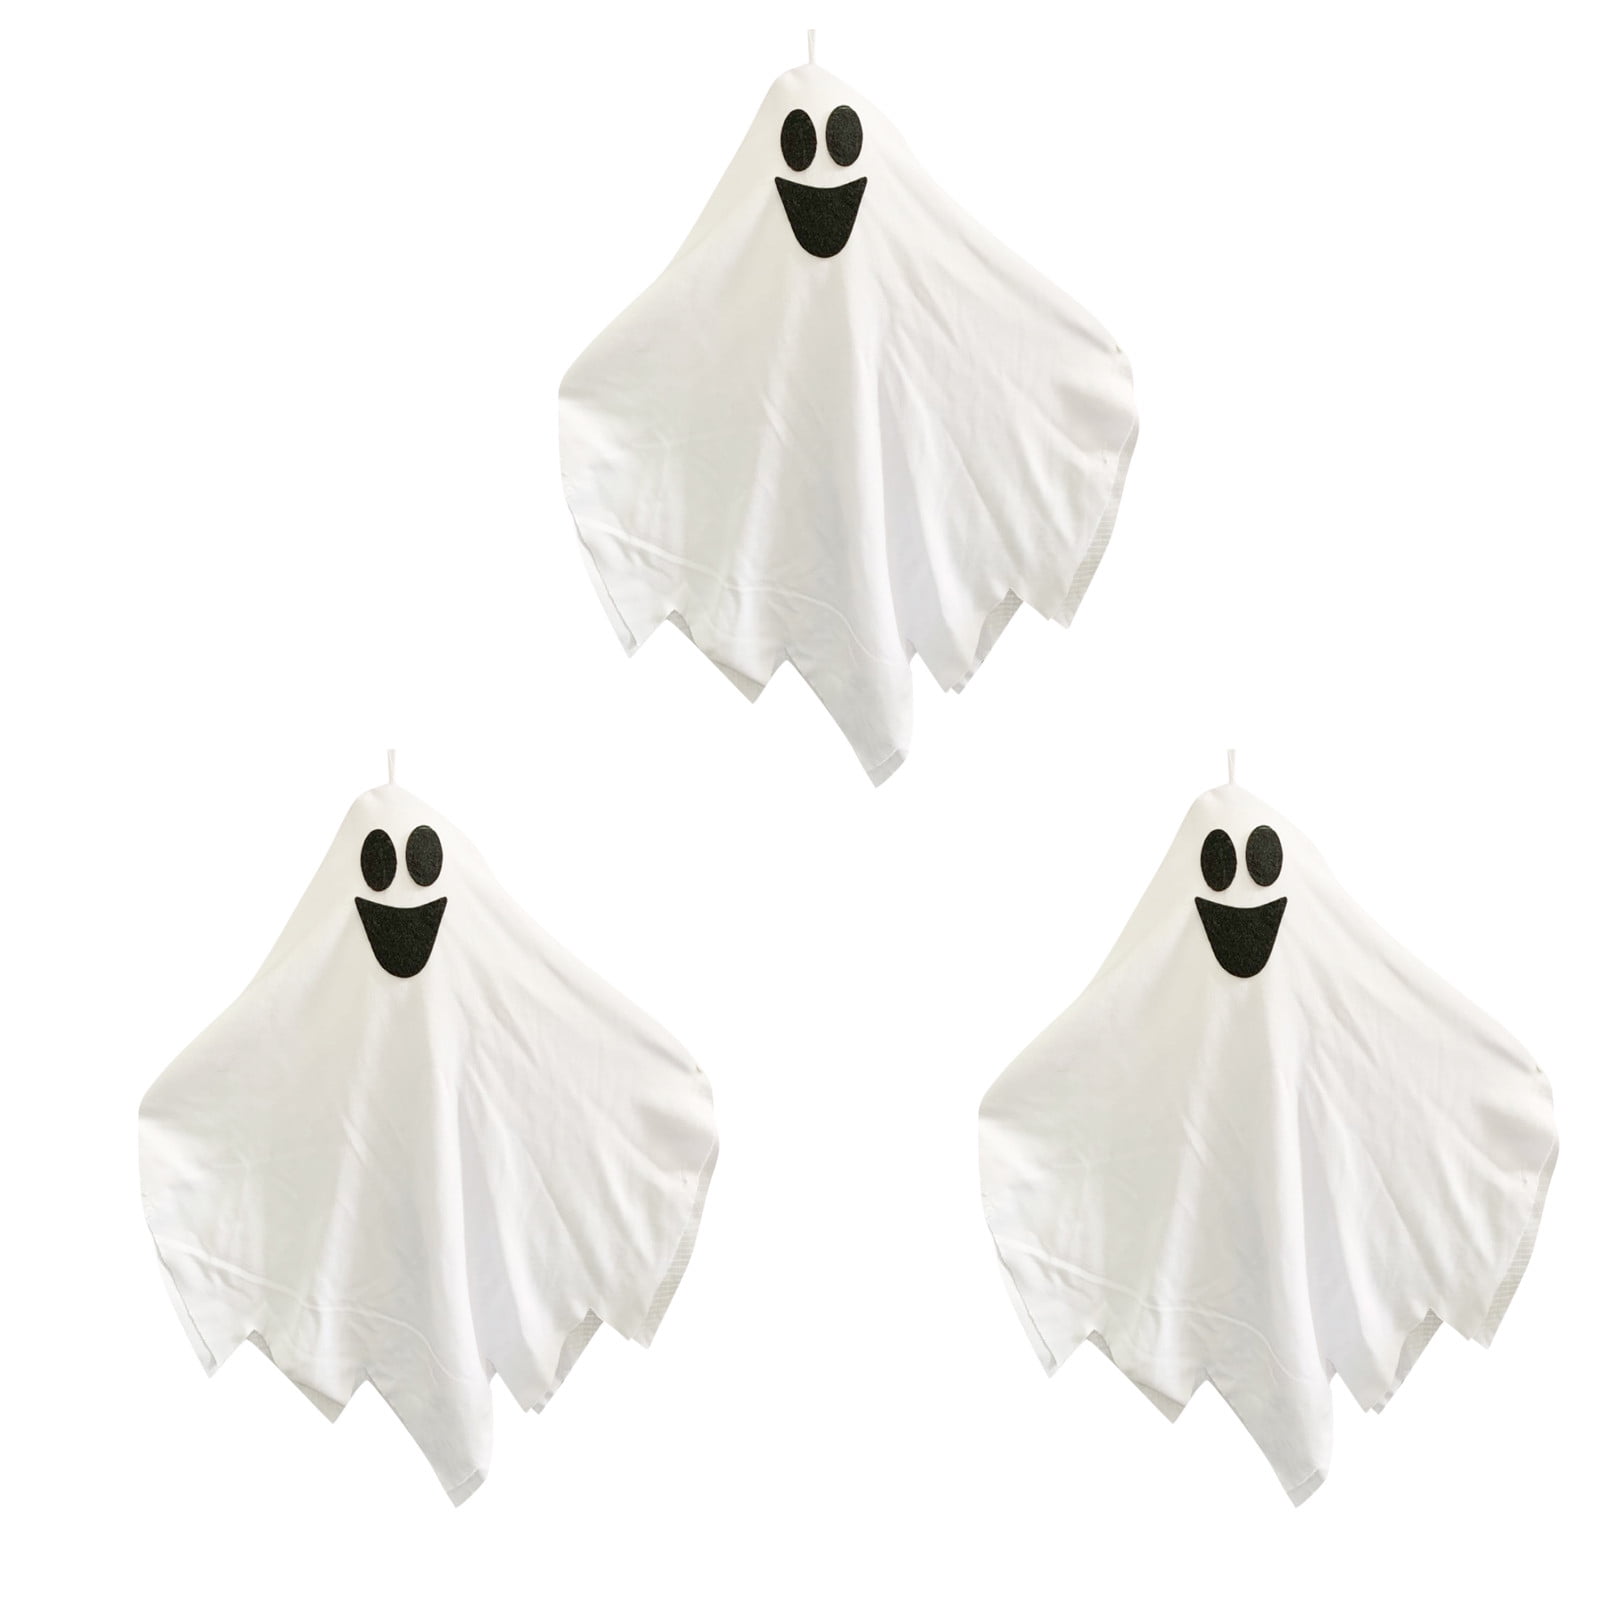 Details about   Halloween Hanging Ghost  Prop Scary Door Home Decor For Bar Party 